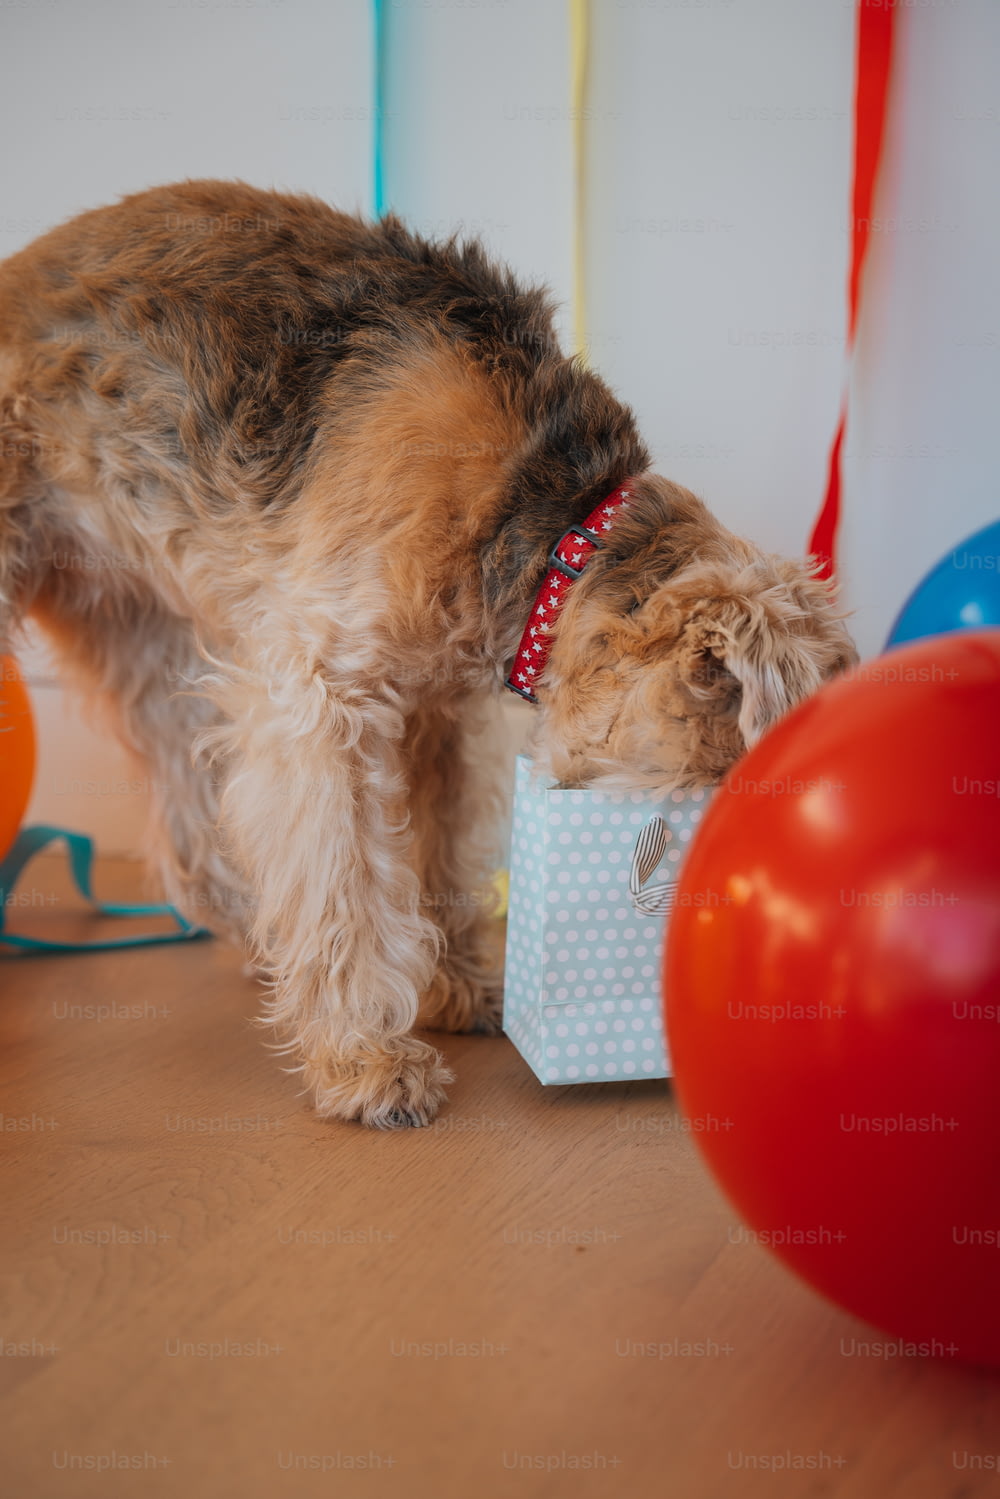 a small dog standing next to a birthday present